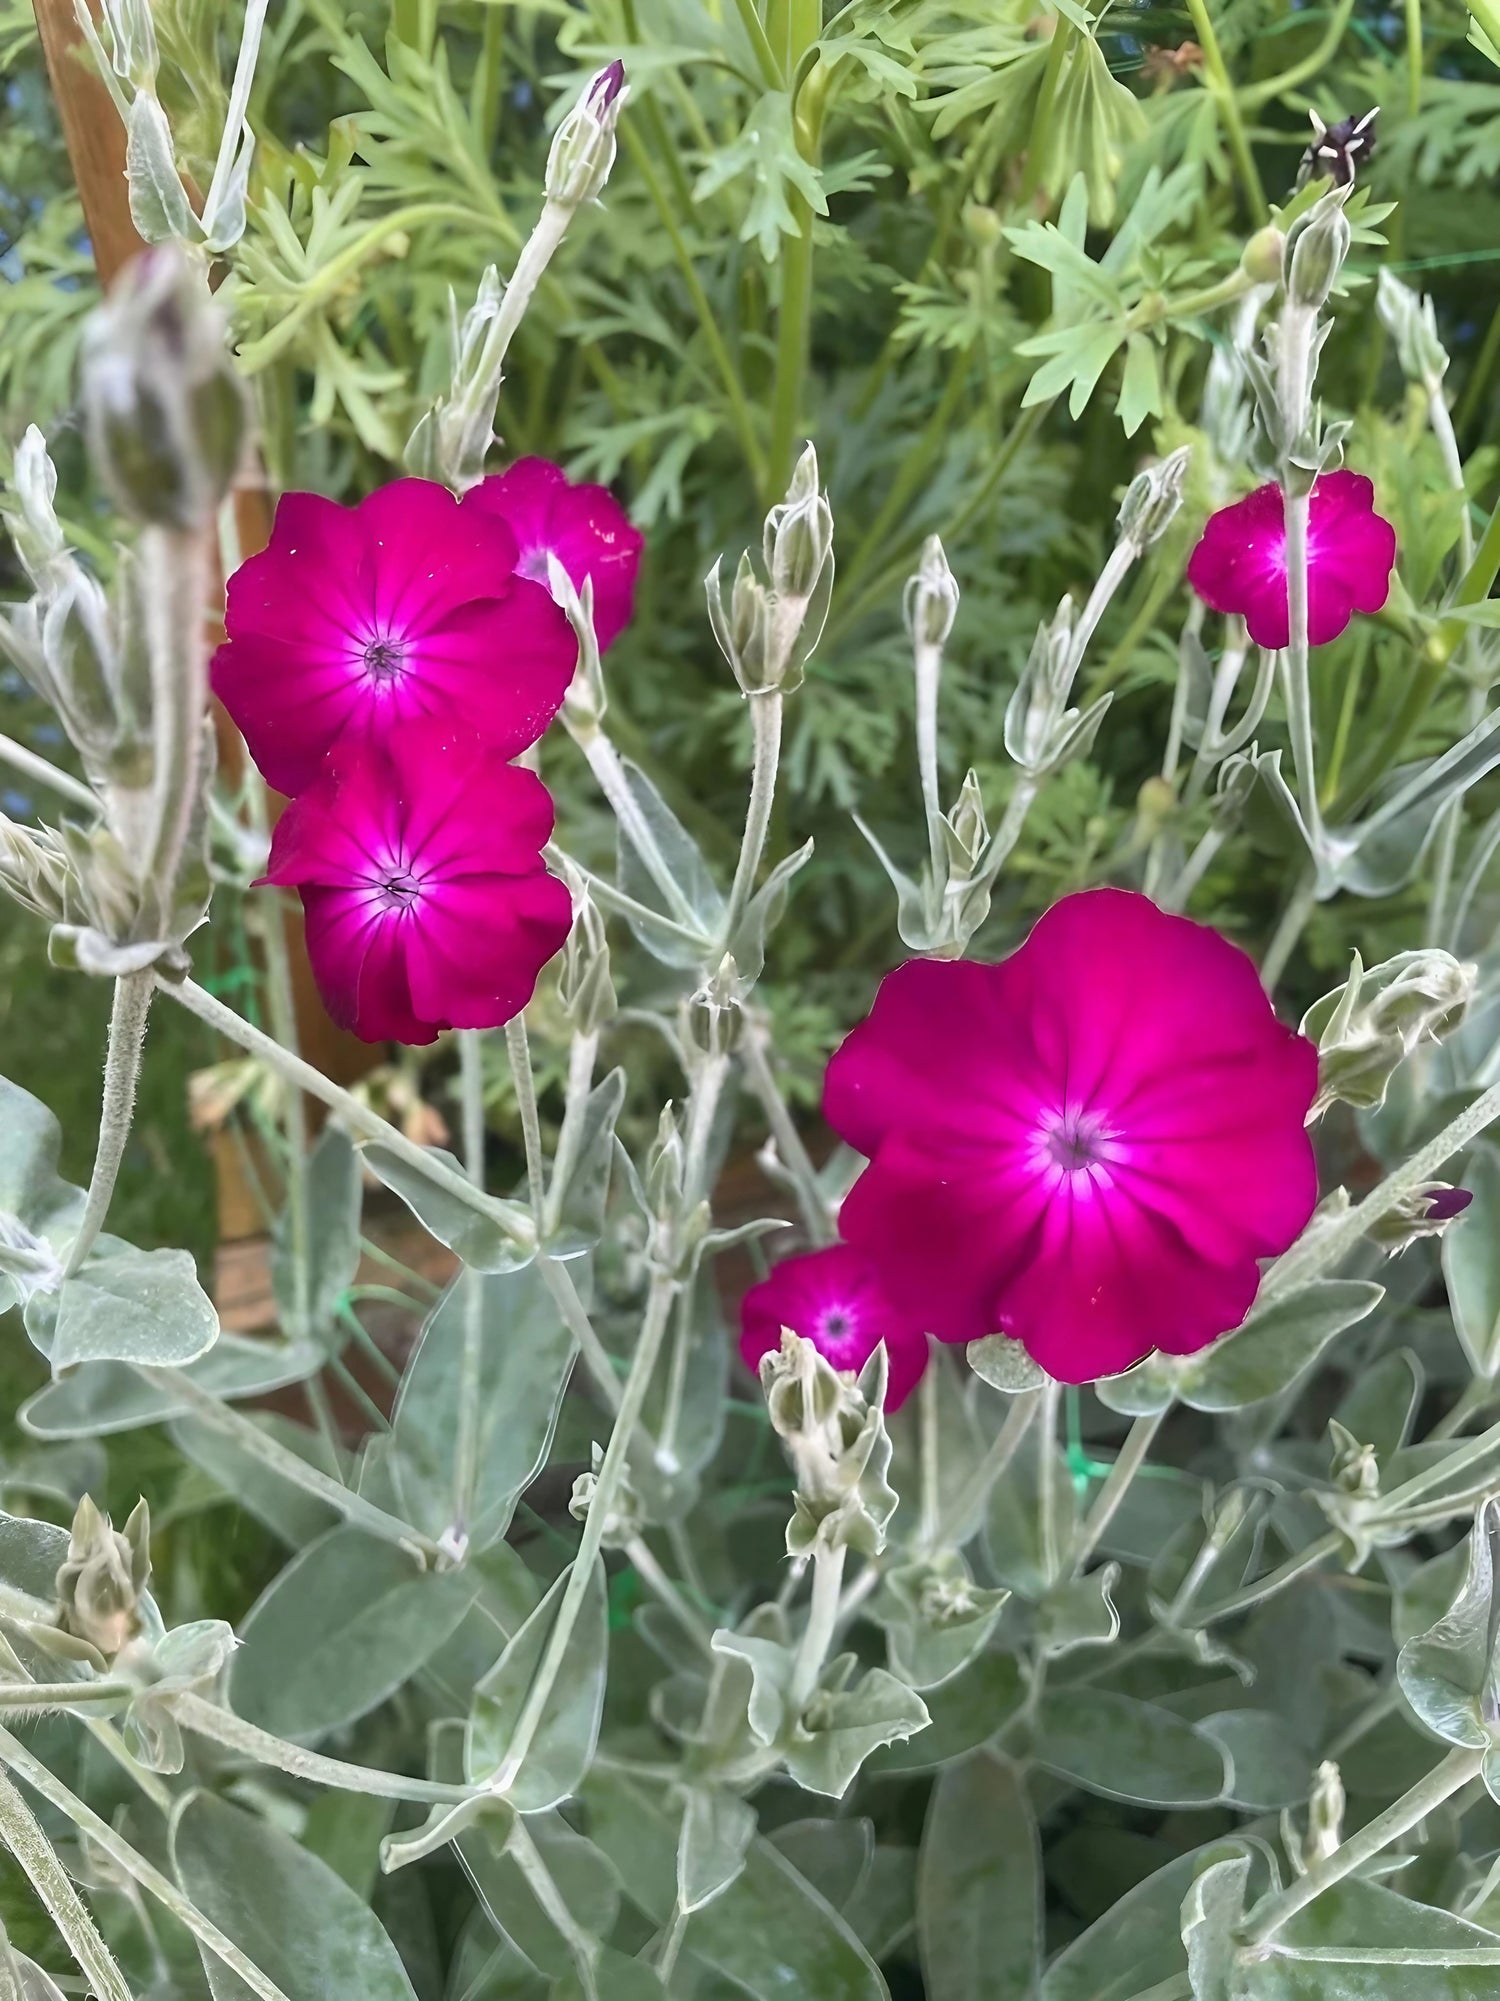 Close-up of Rose Campion with vibrant magenta blossoms in a garden setting